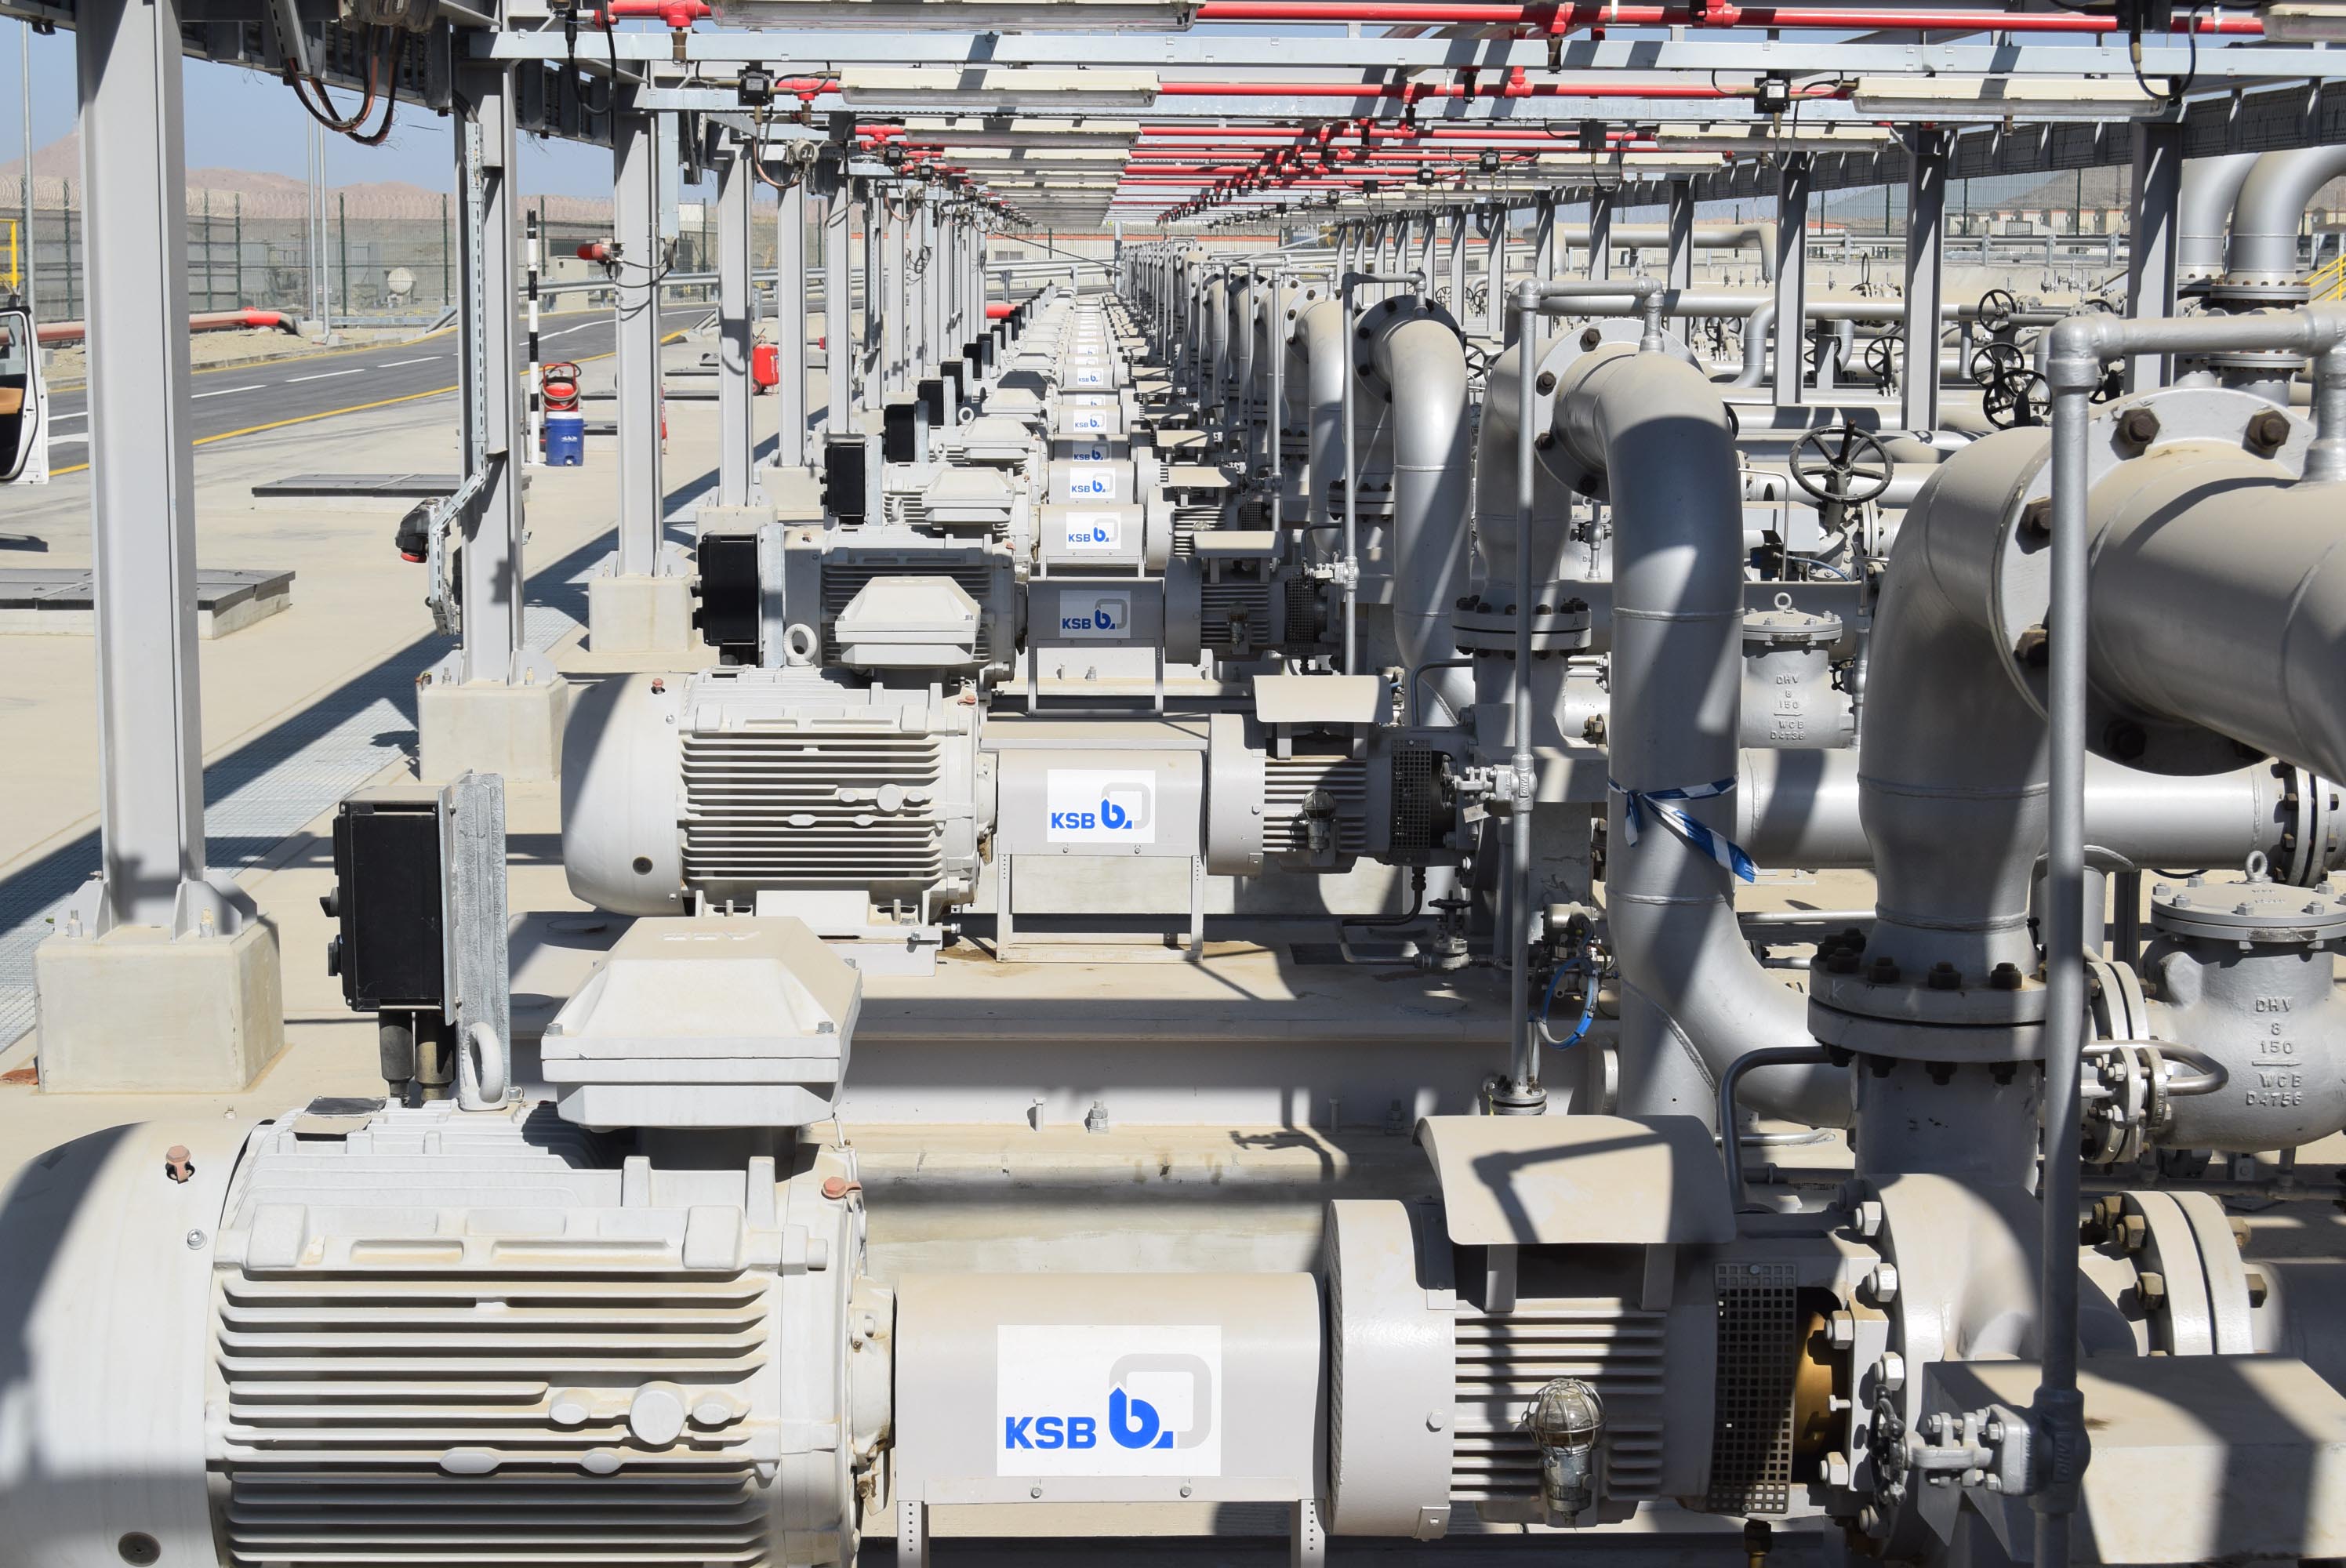 Photo: KSB has supplied 39 refinery pumps for a new pipeline in Oman (© KSB SE & Co KGaA, Frankenthal).